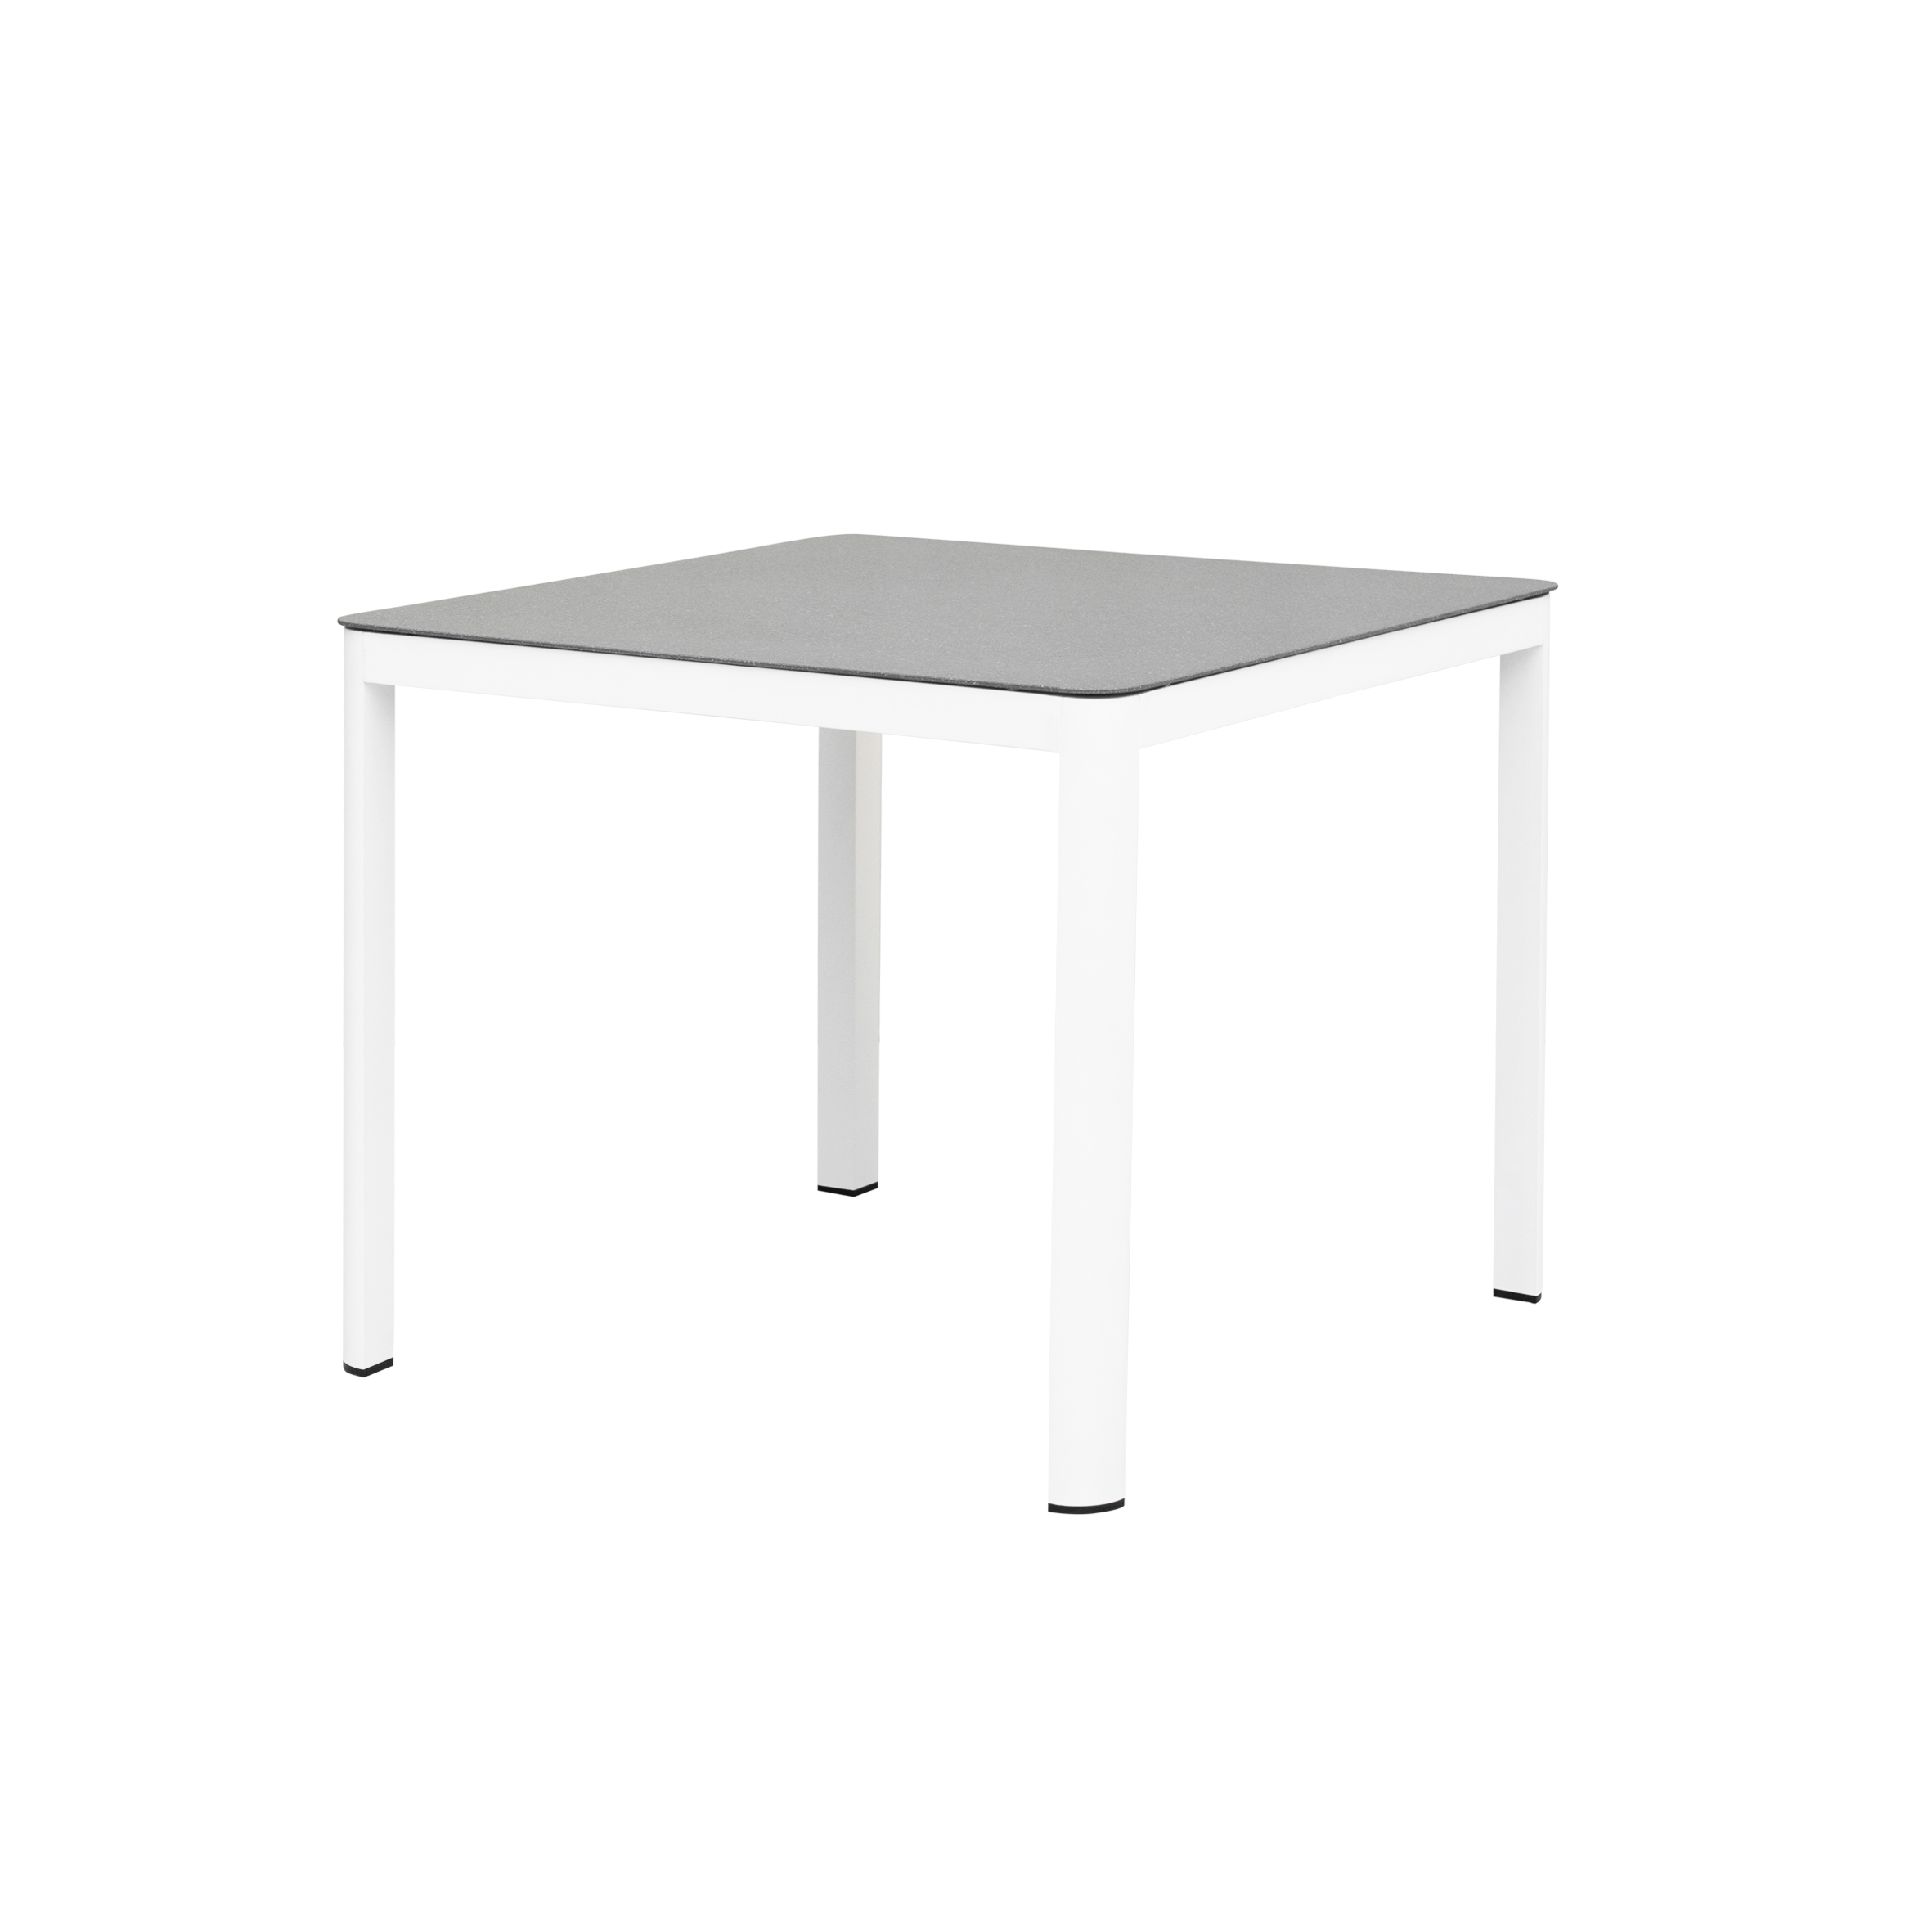 Factory Direct: Belgium Square Table (Stone Glass) - High-quality Furniture at Affordable Prices